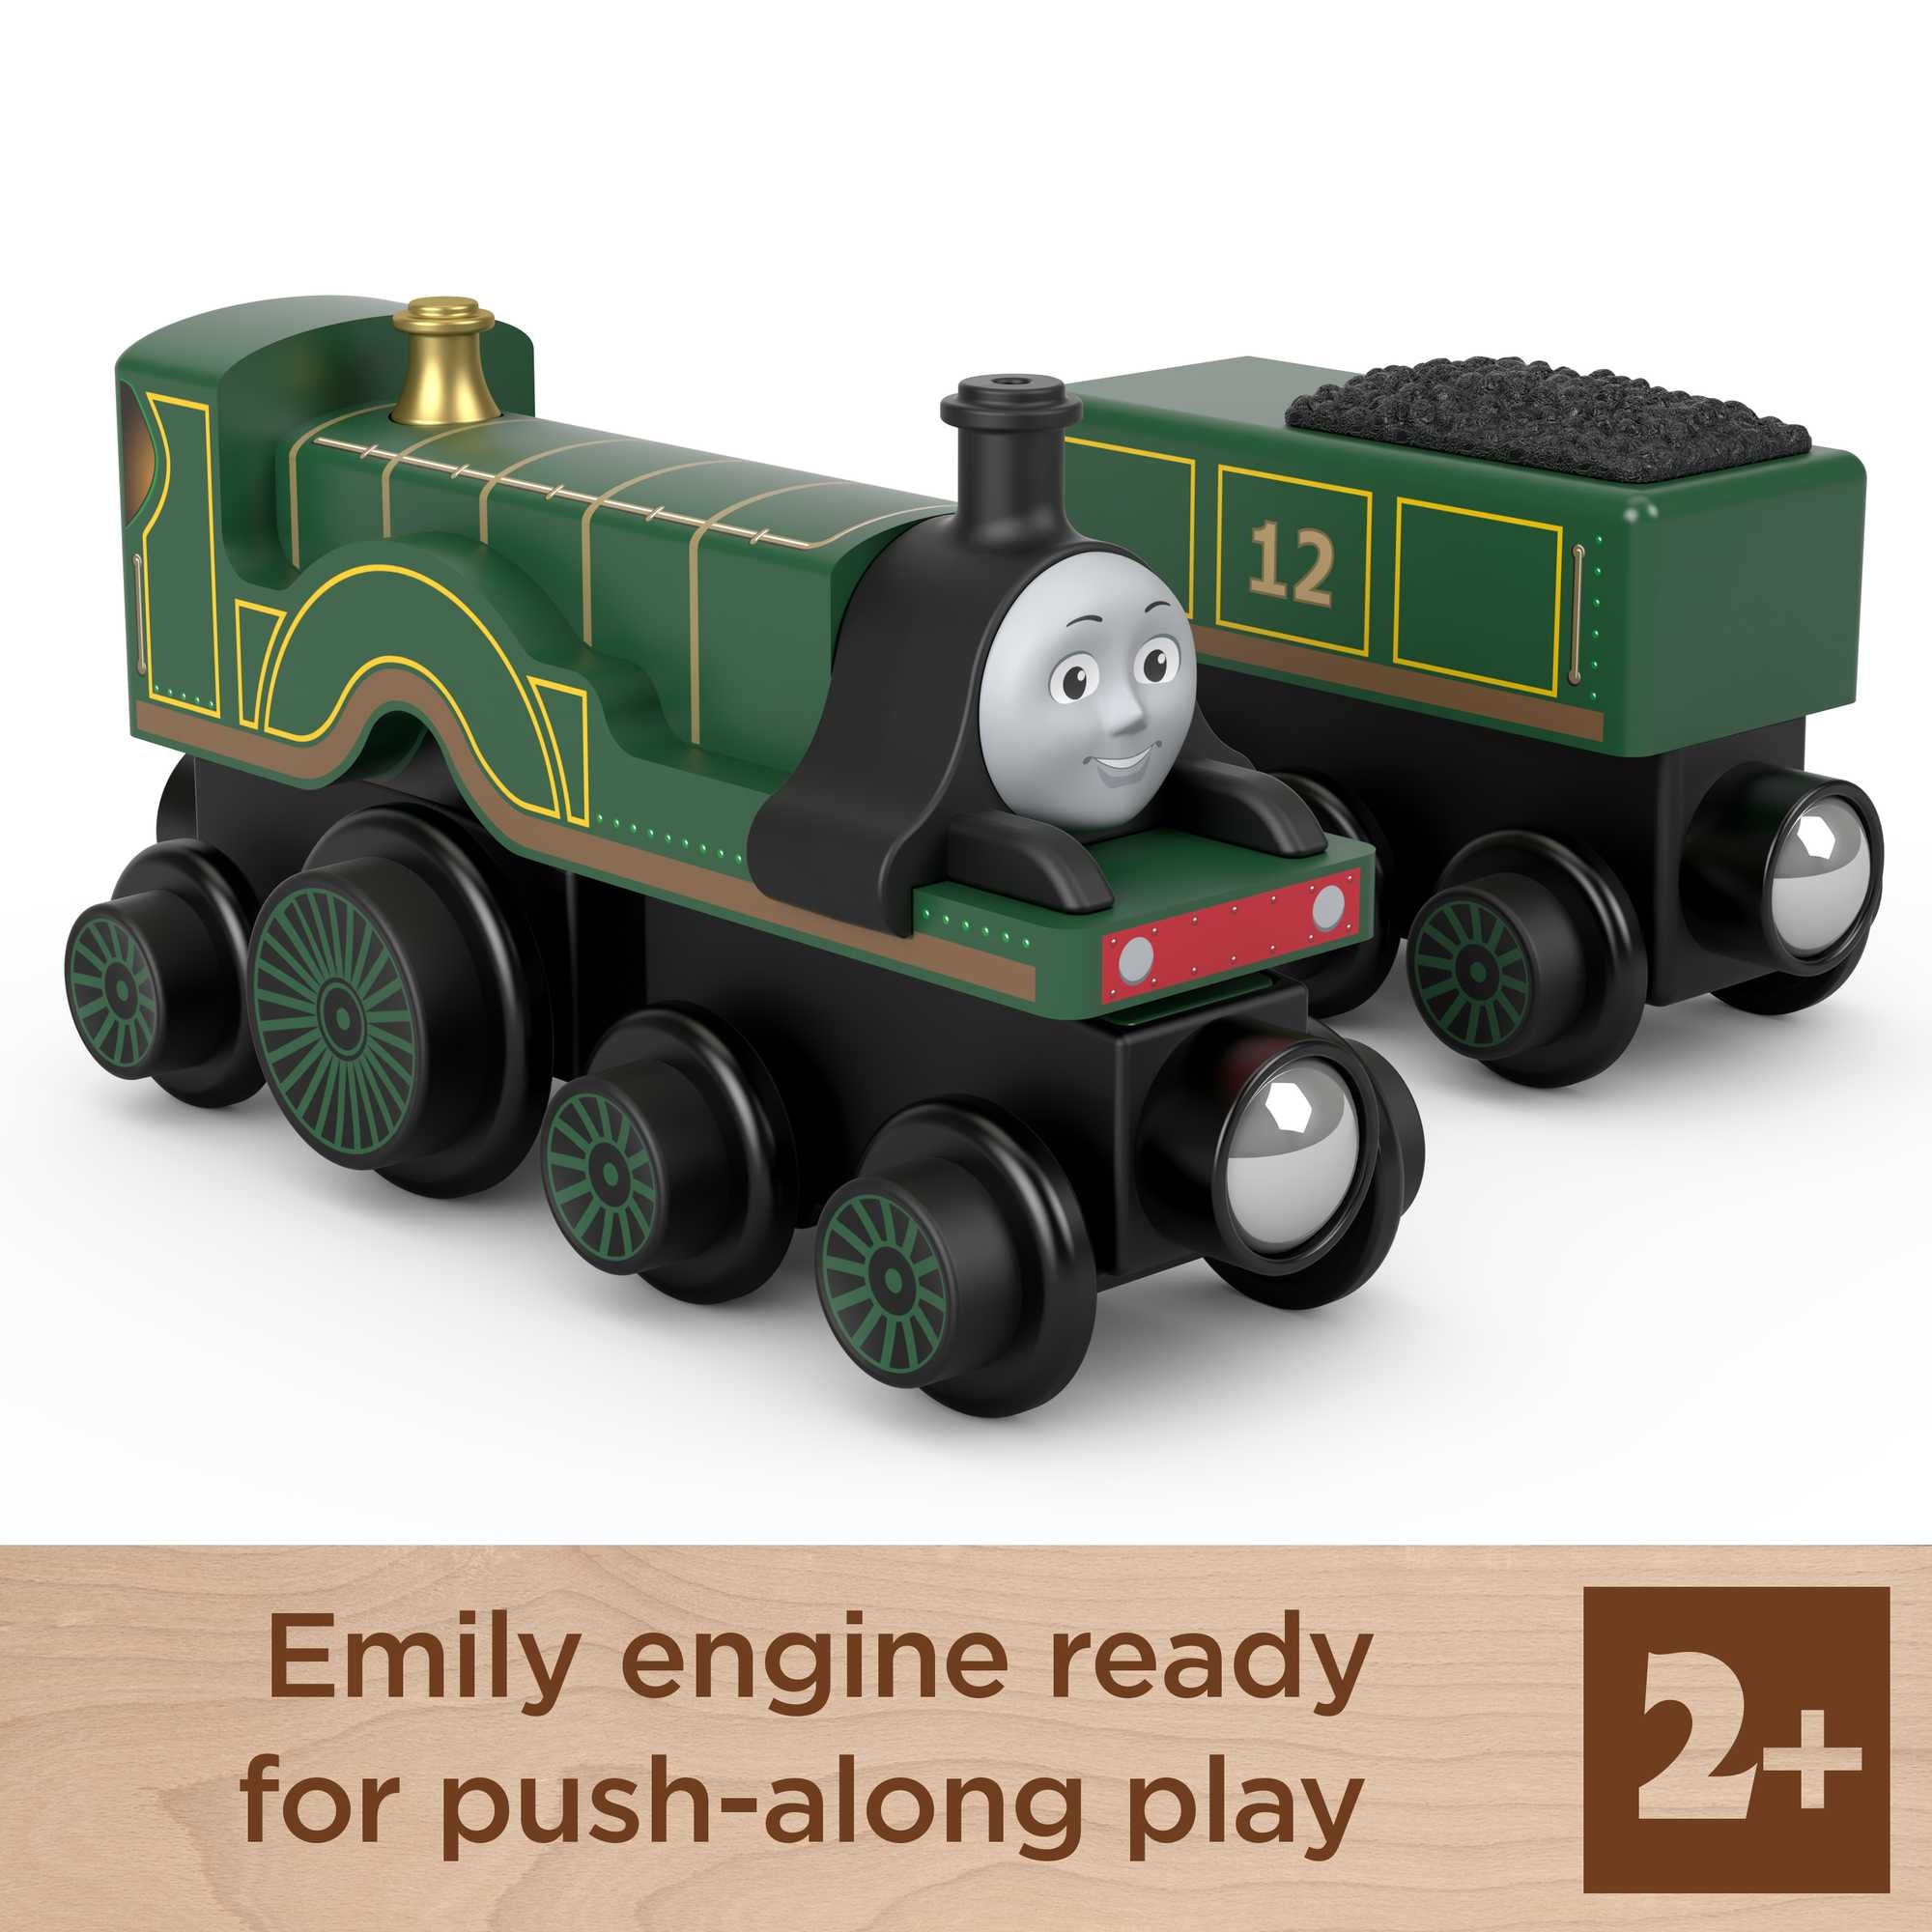 Fisher Price-Thomas & Friends Wooden Railway - Emily Engine and Coal-Car-HBK13-Legacy Toys